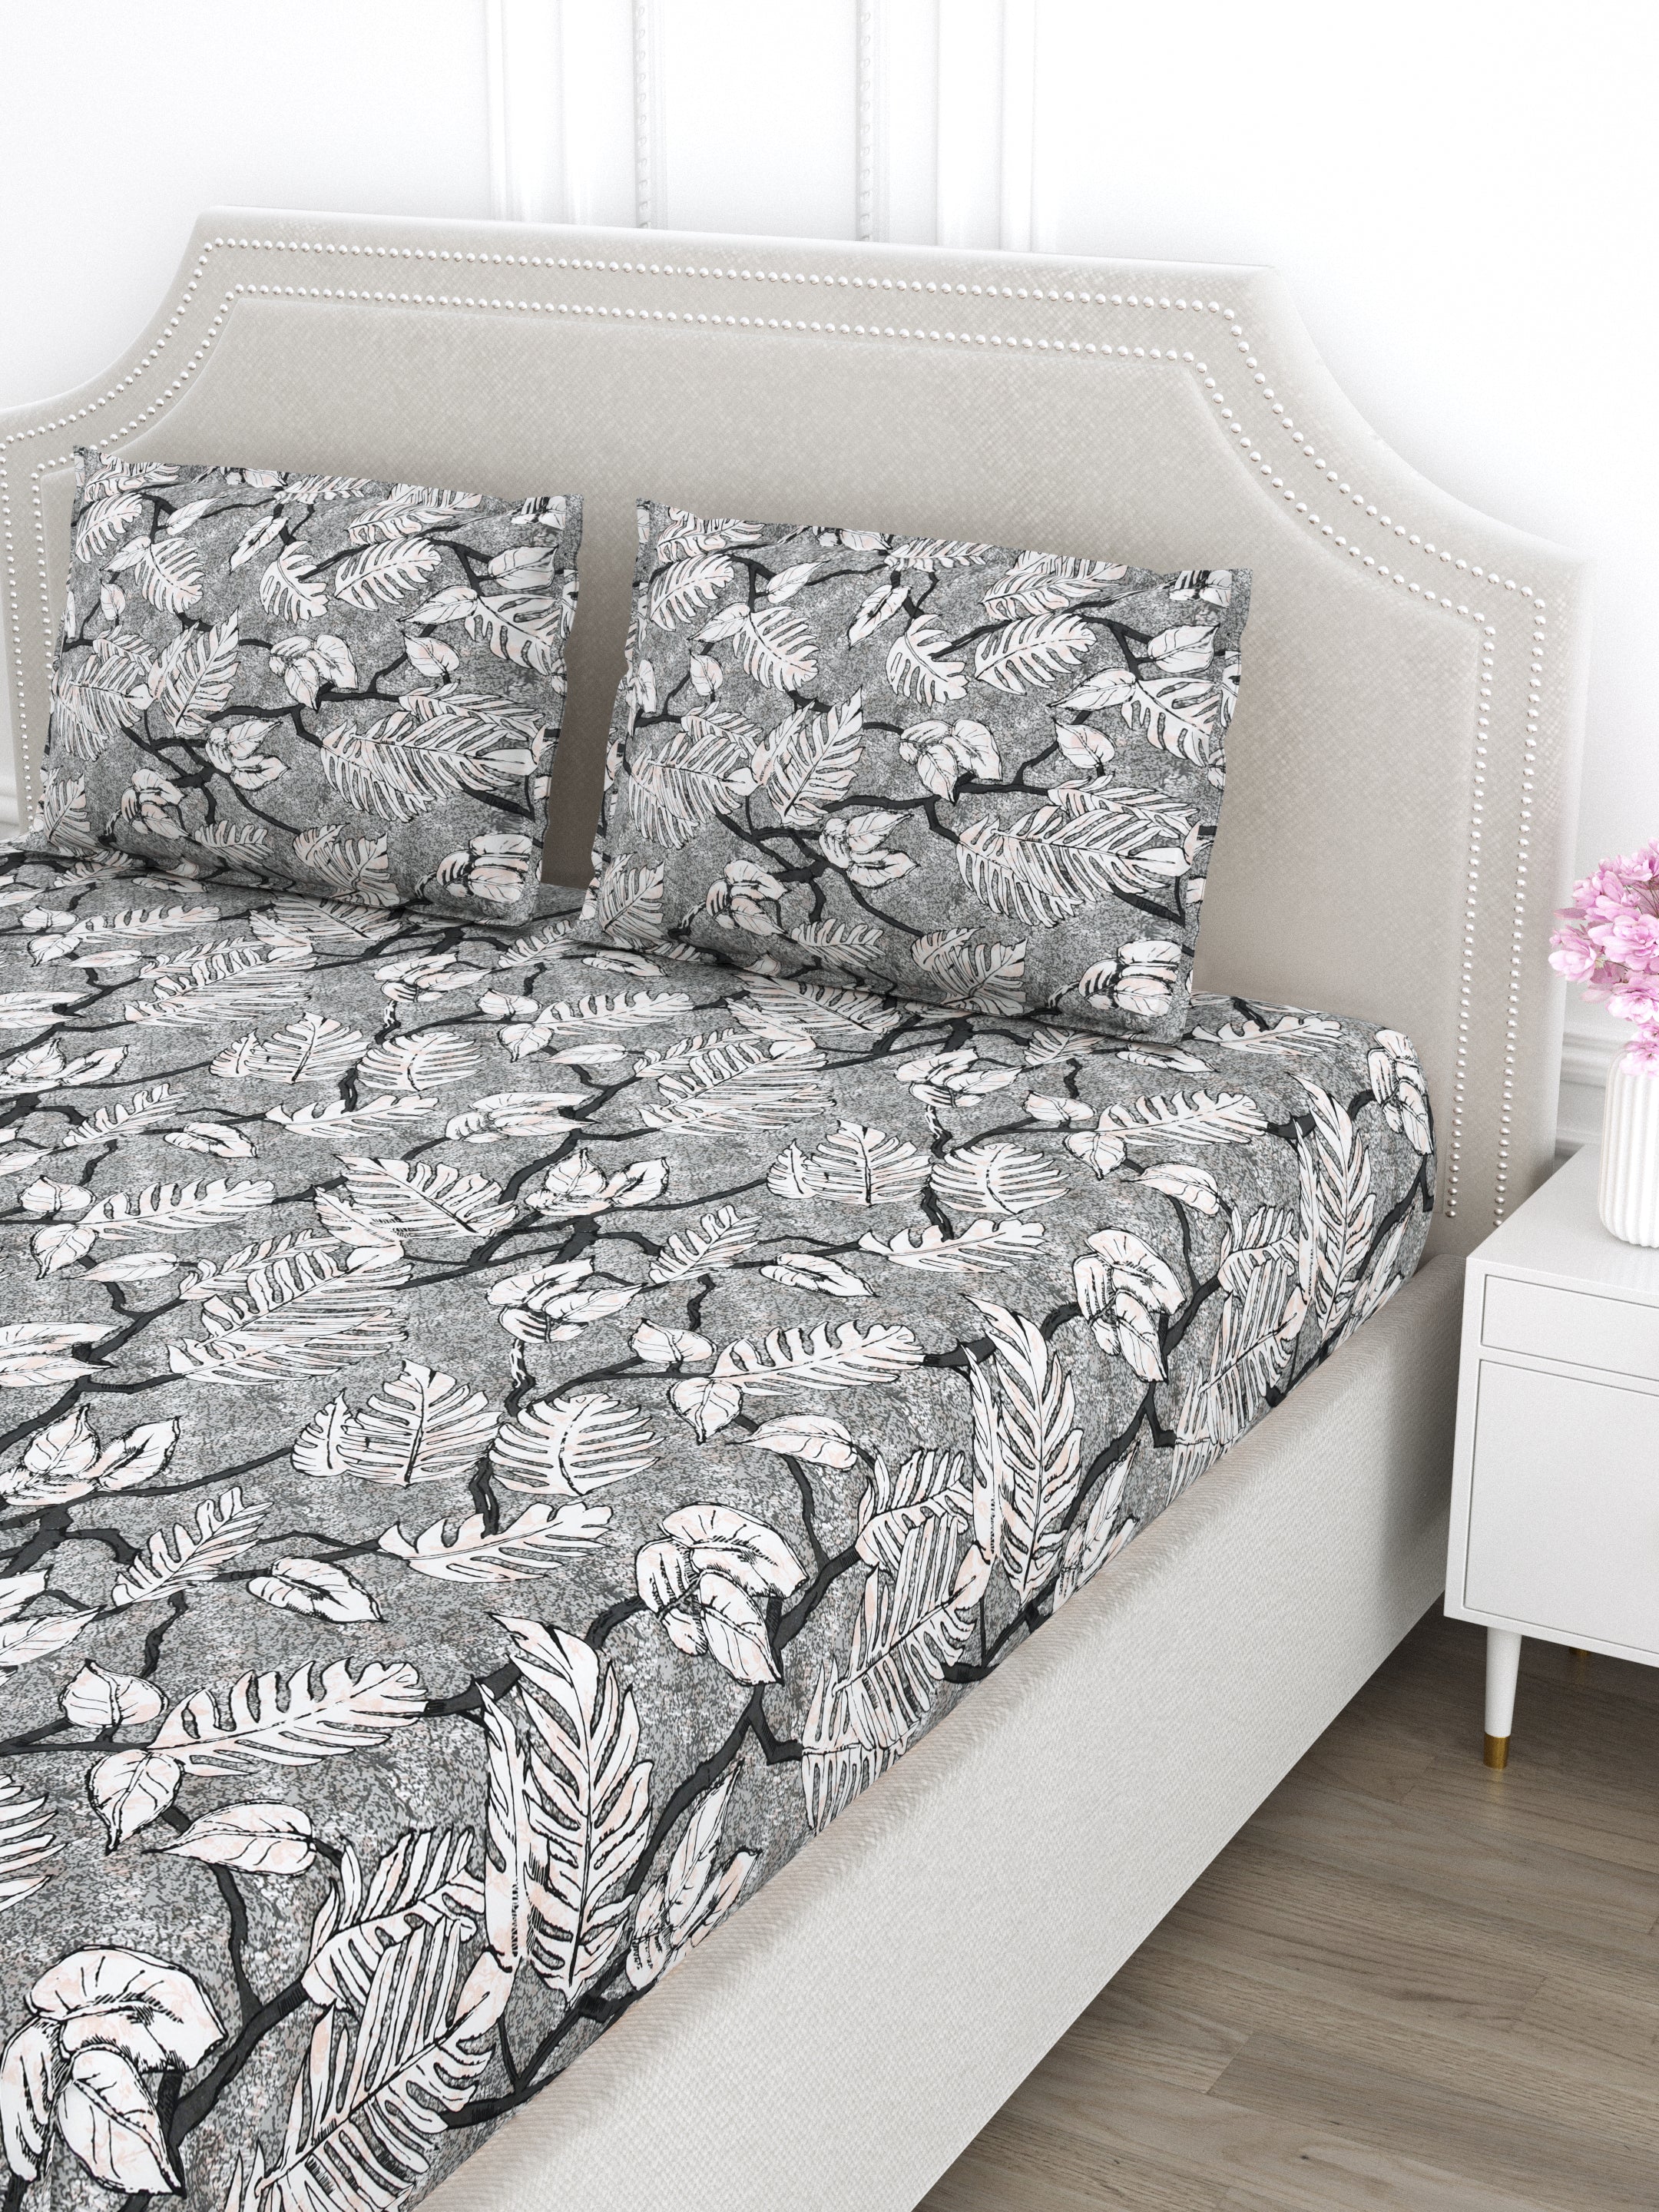 Grey and White Floral Super King Size Cotton Bedsheet